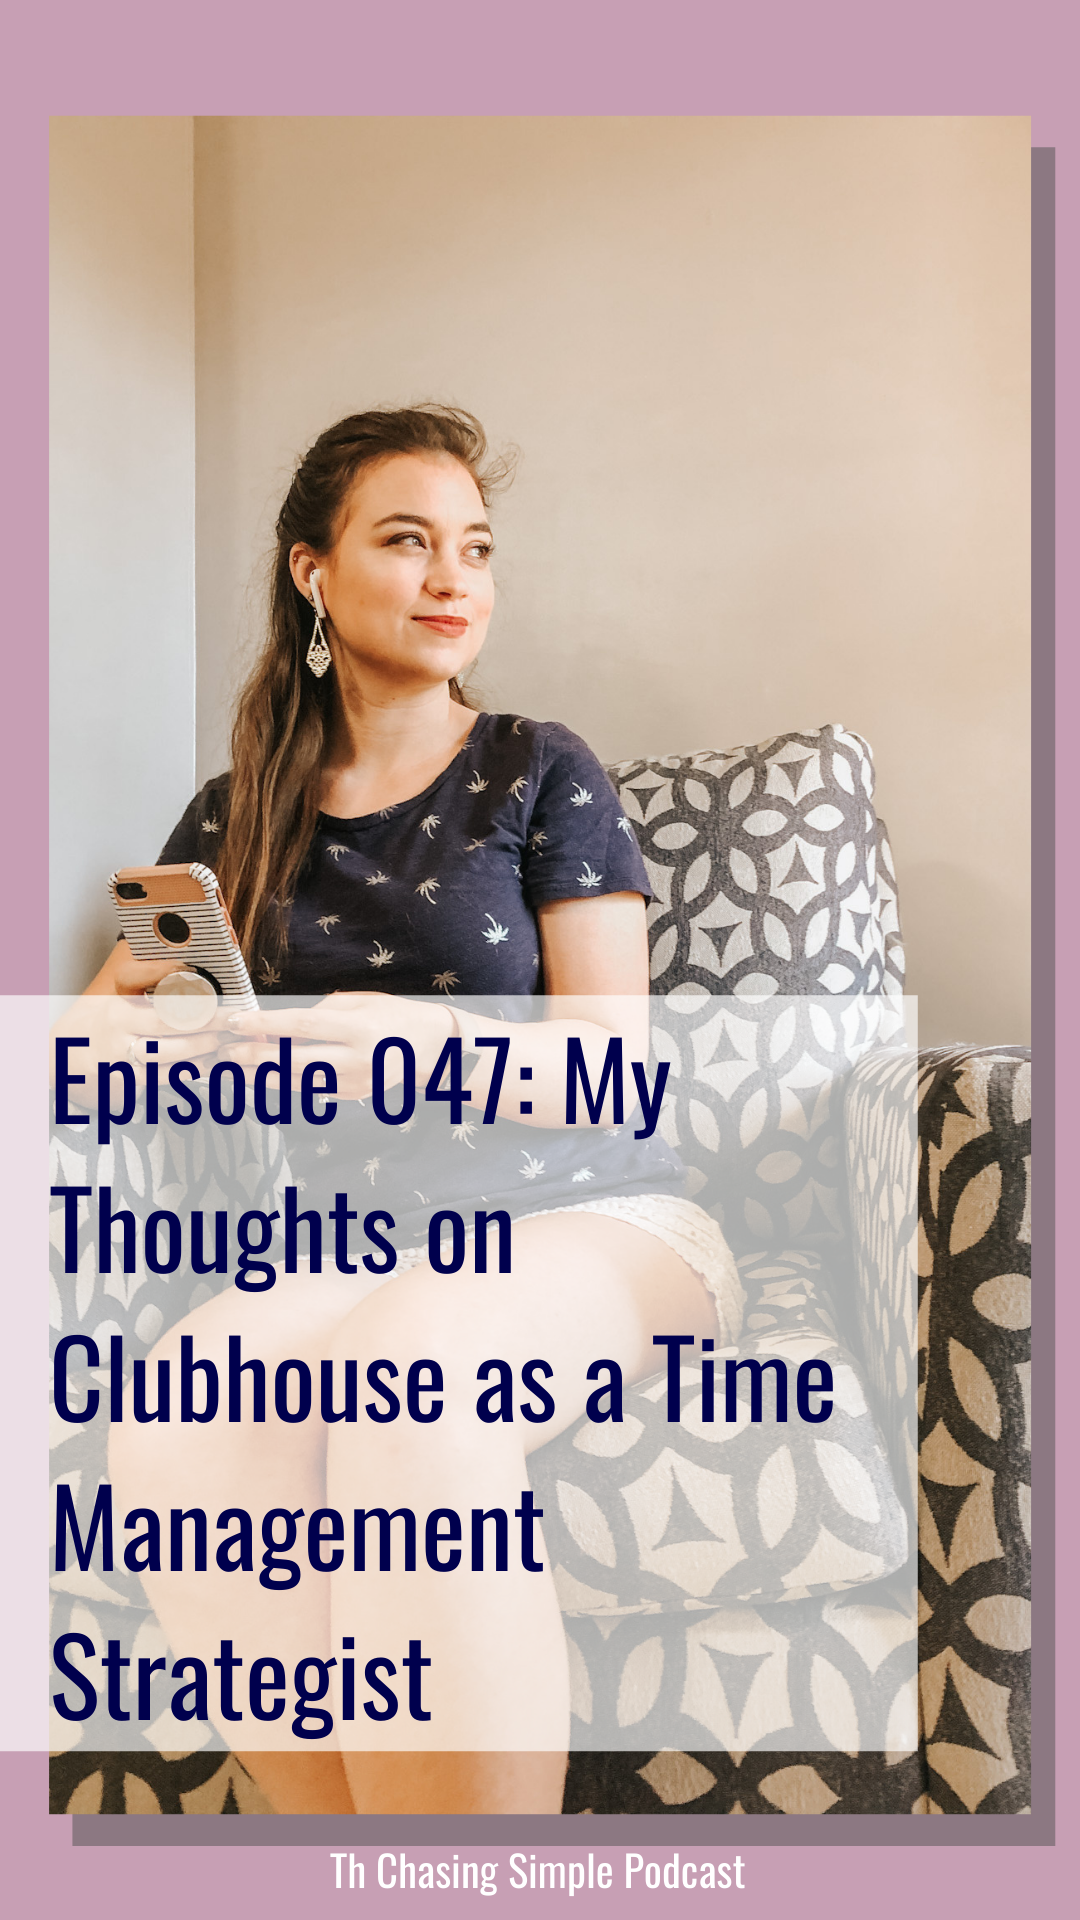 Today I wanted to share some of my thoughts and feelings about Clubhouse from the perspective of time management.